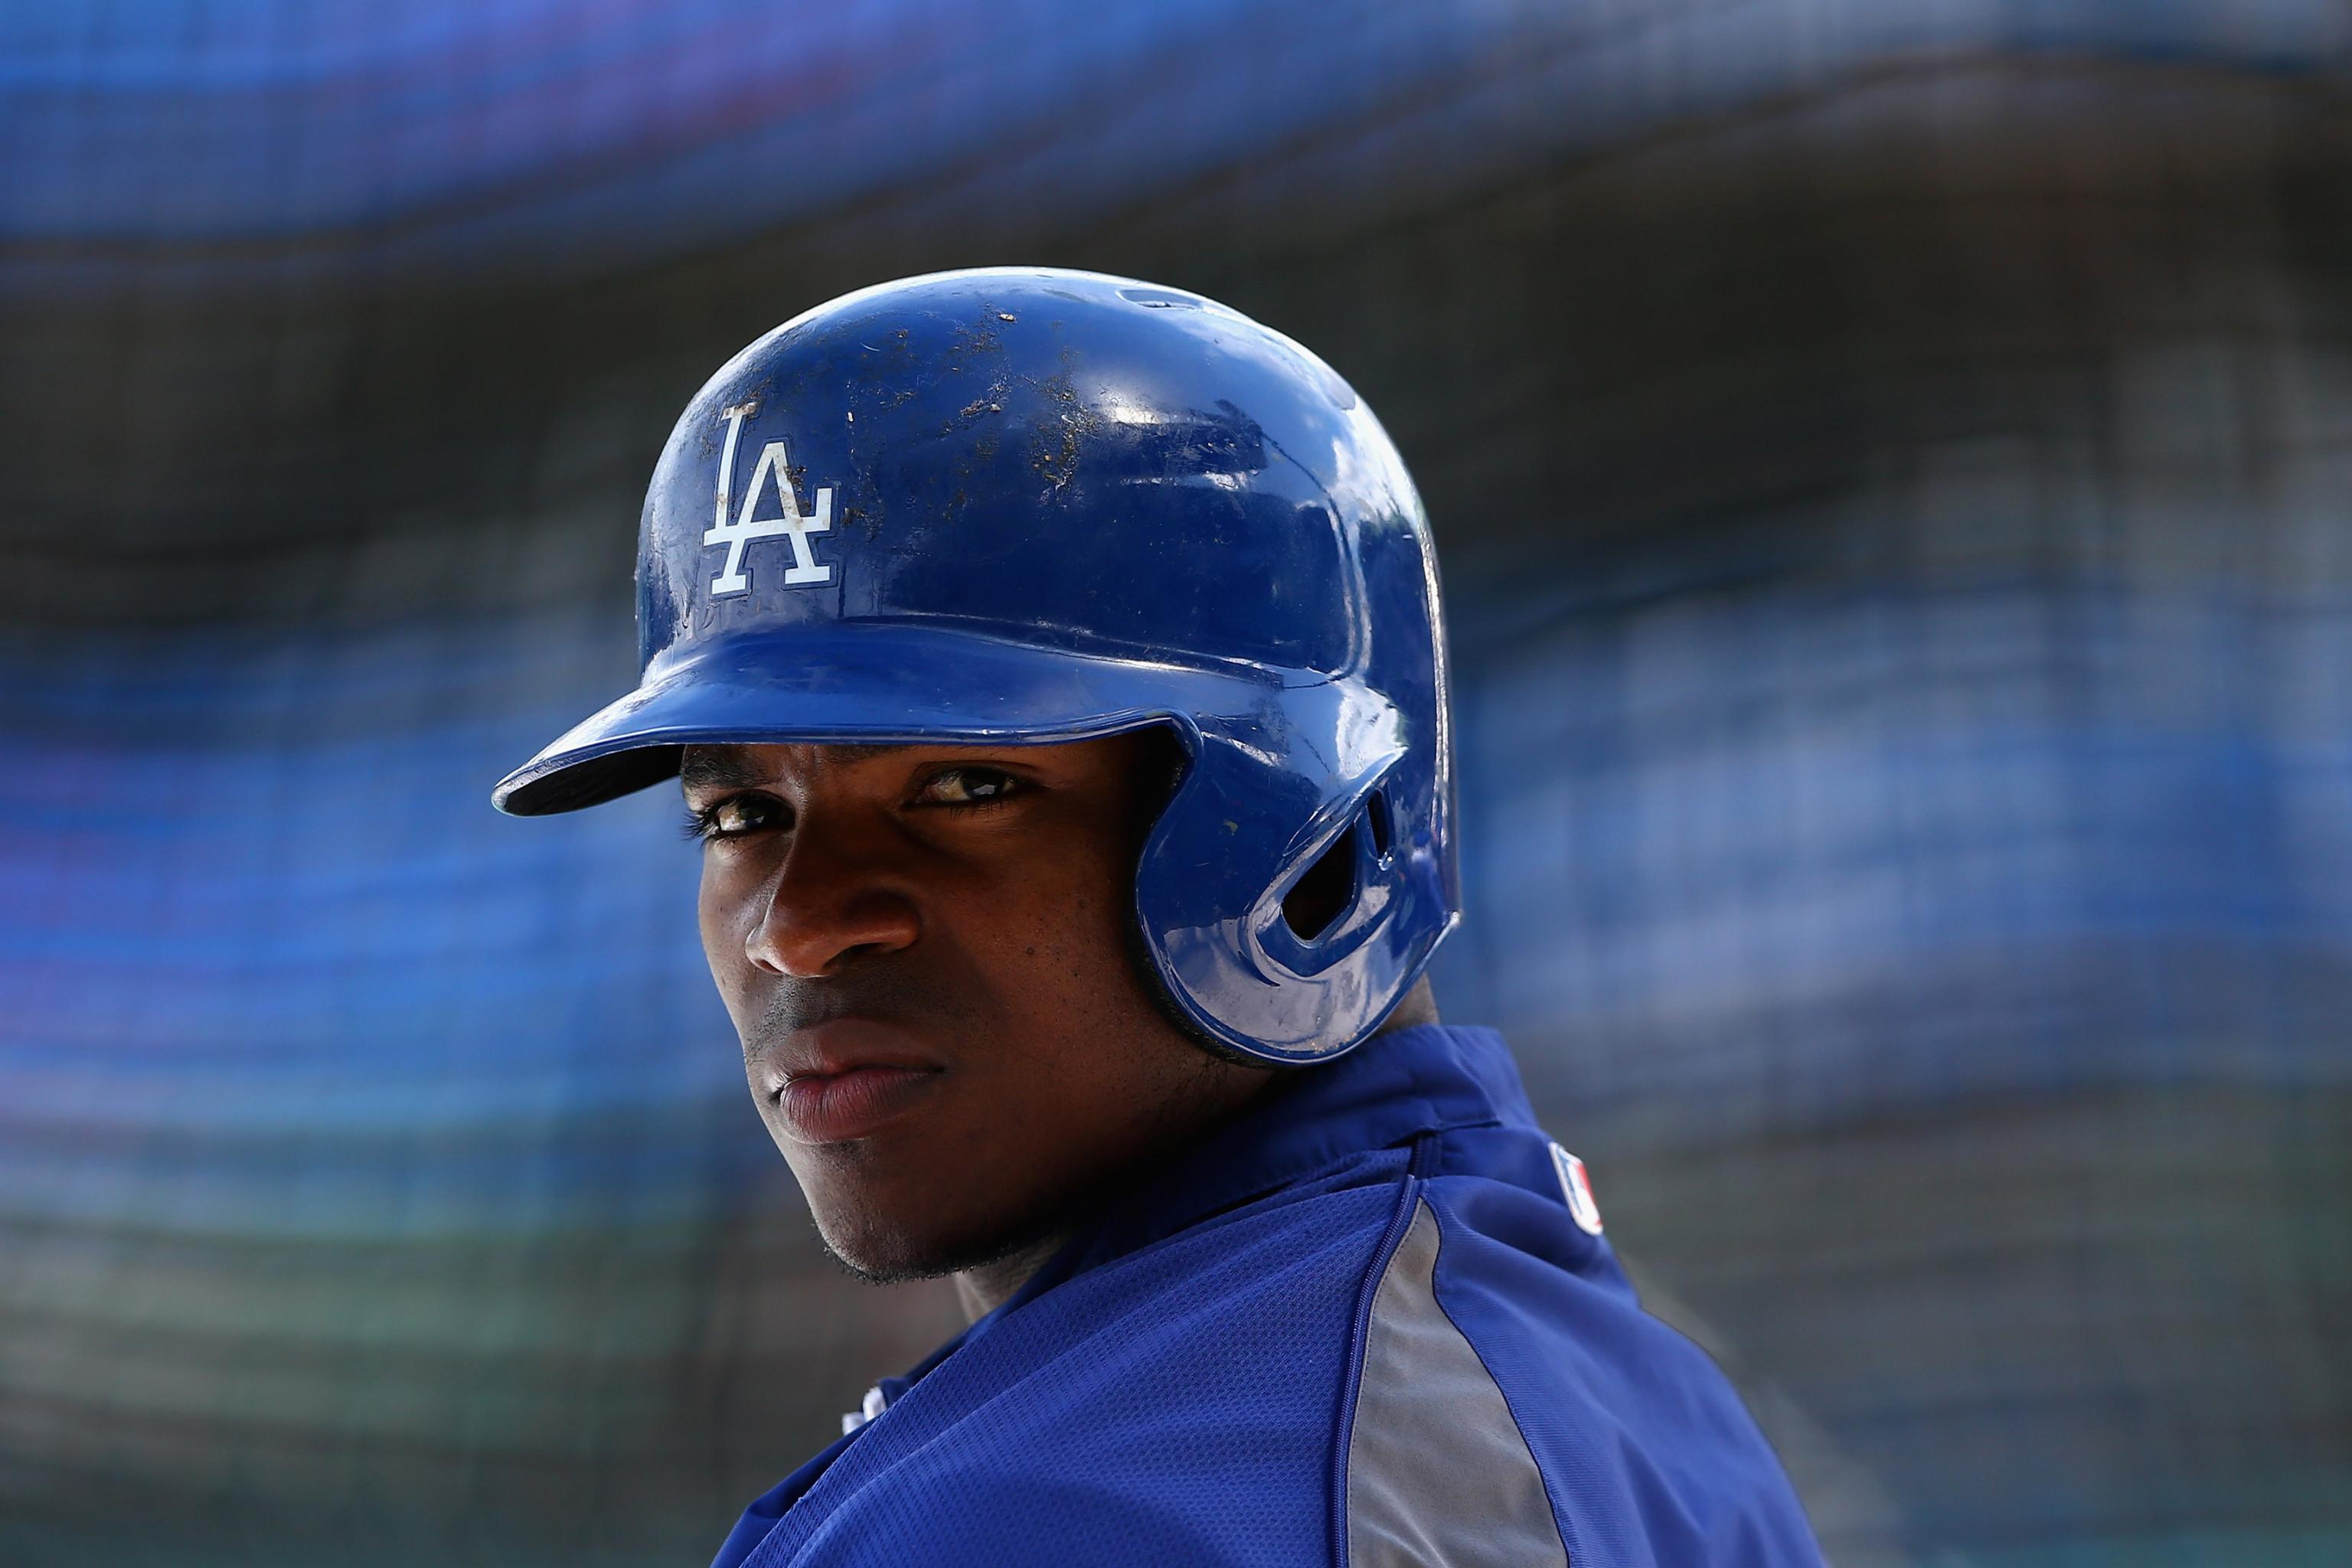 Yasiel Puig's coming-to-America story is like something out of a